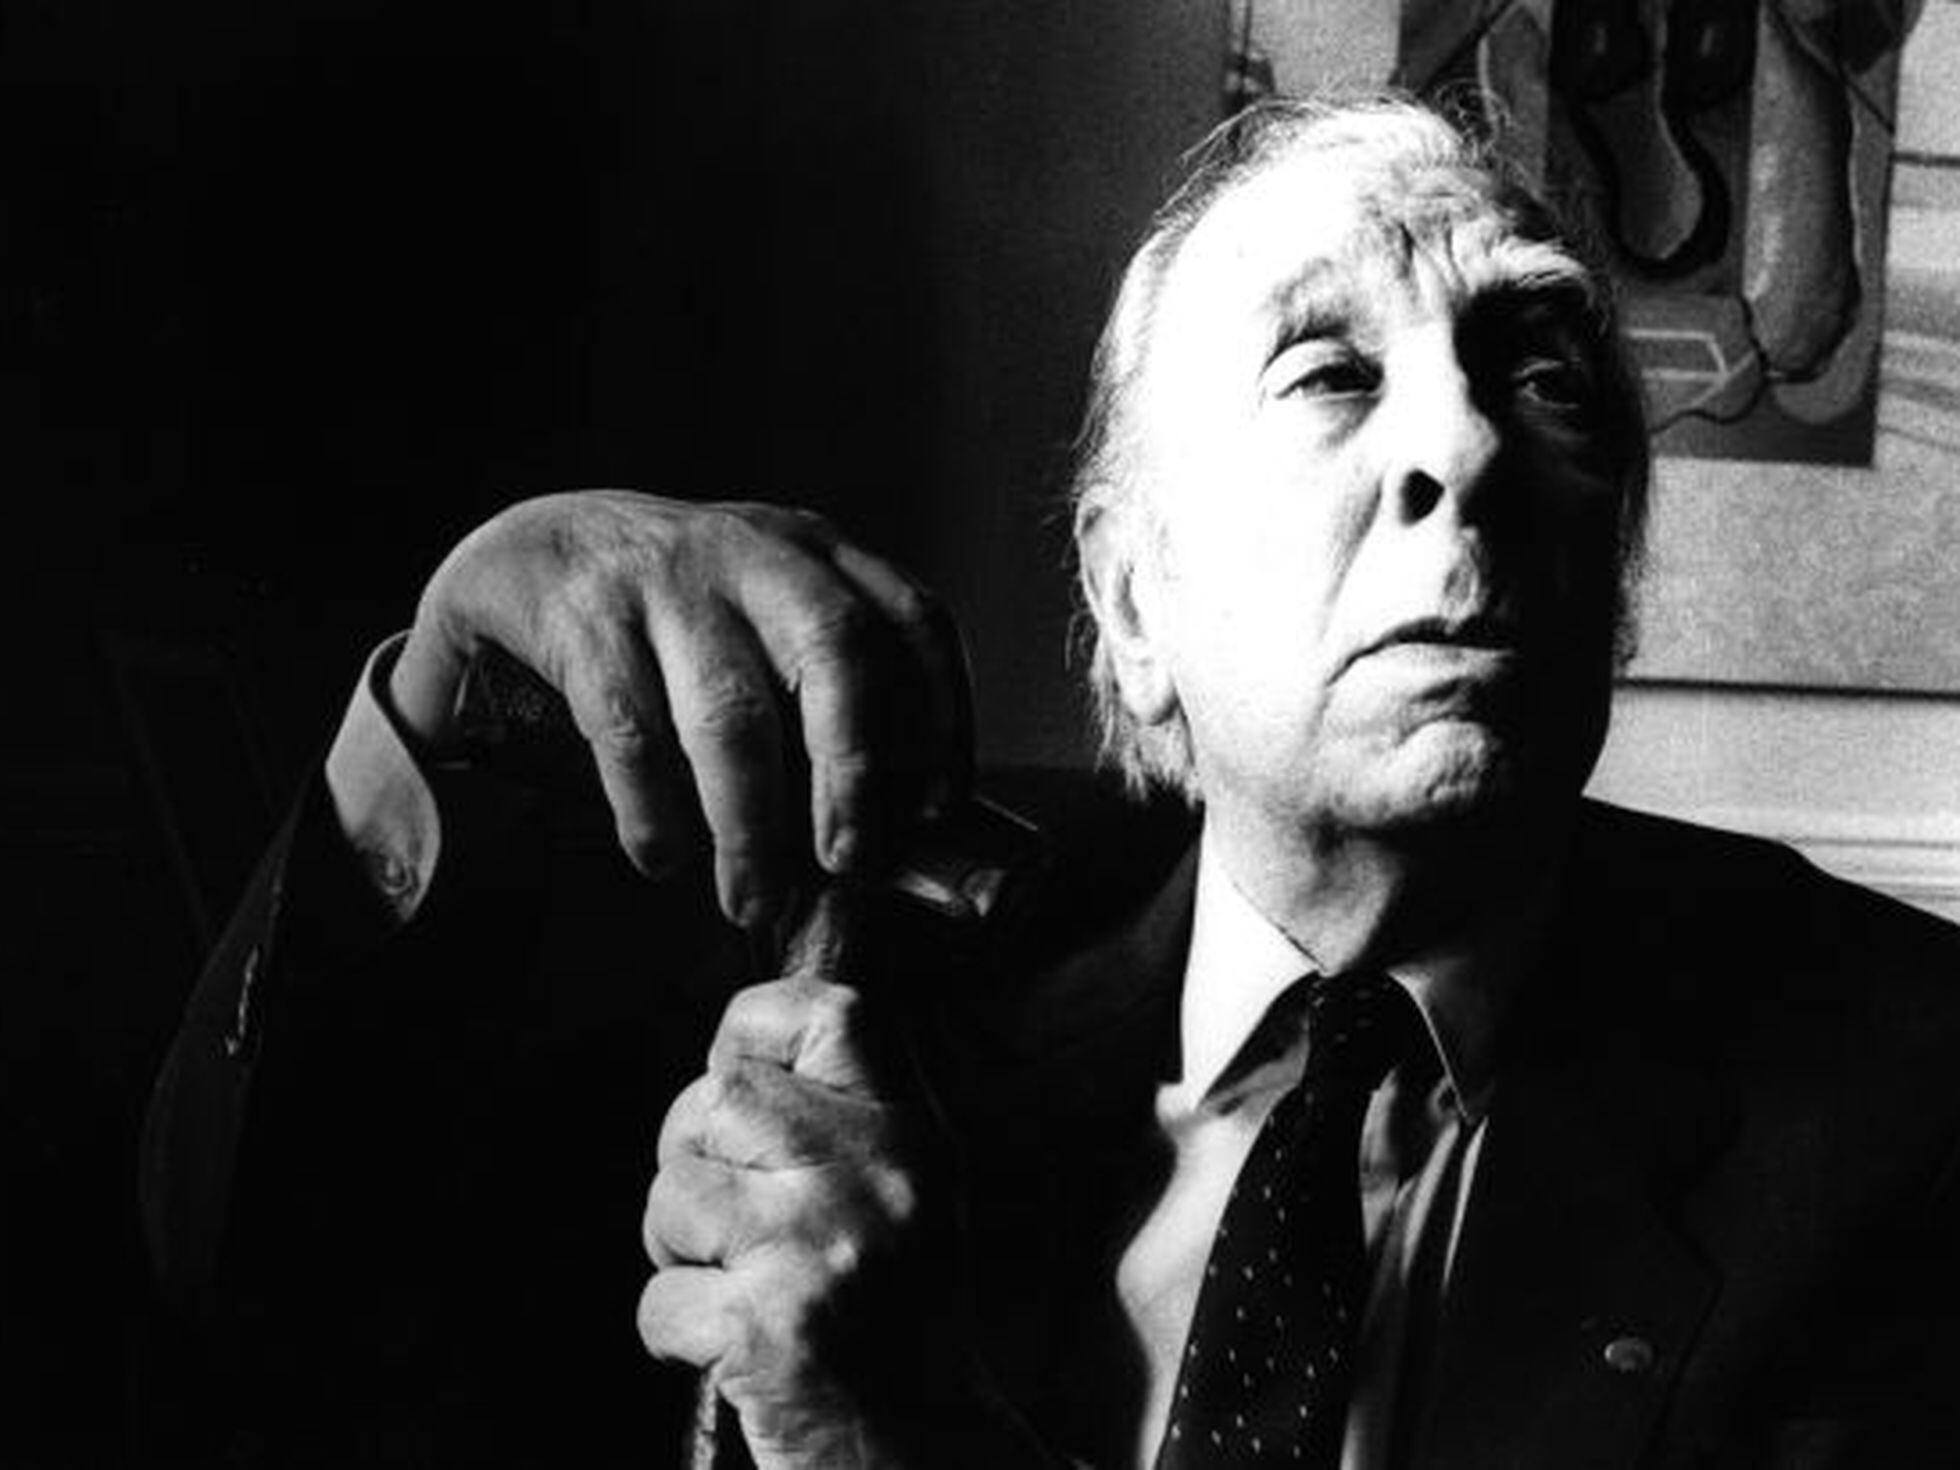 I wanted to be a part of Buenos Aires – and Borges was my guide